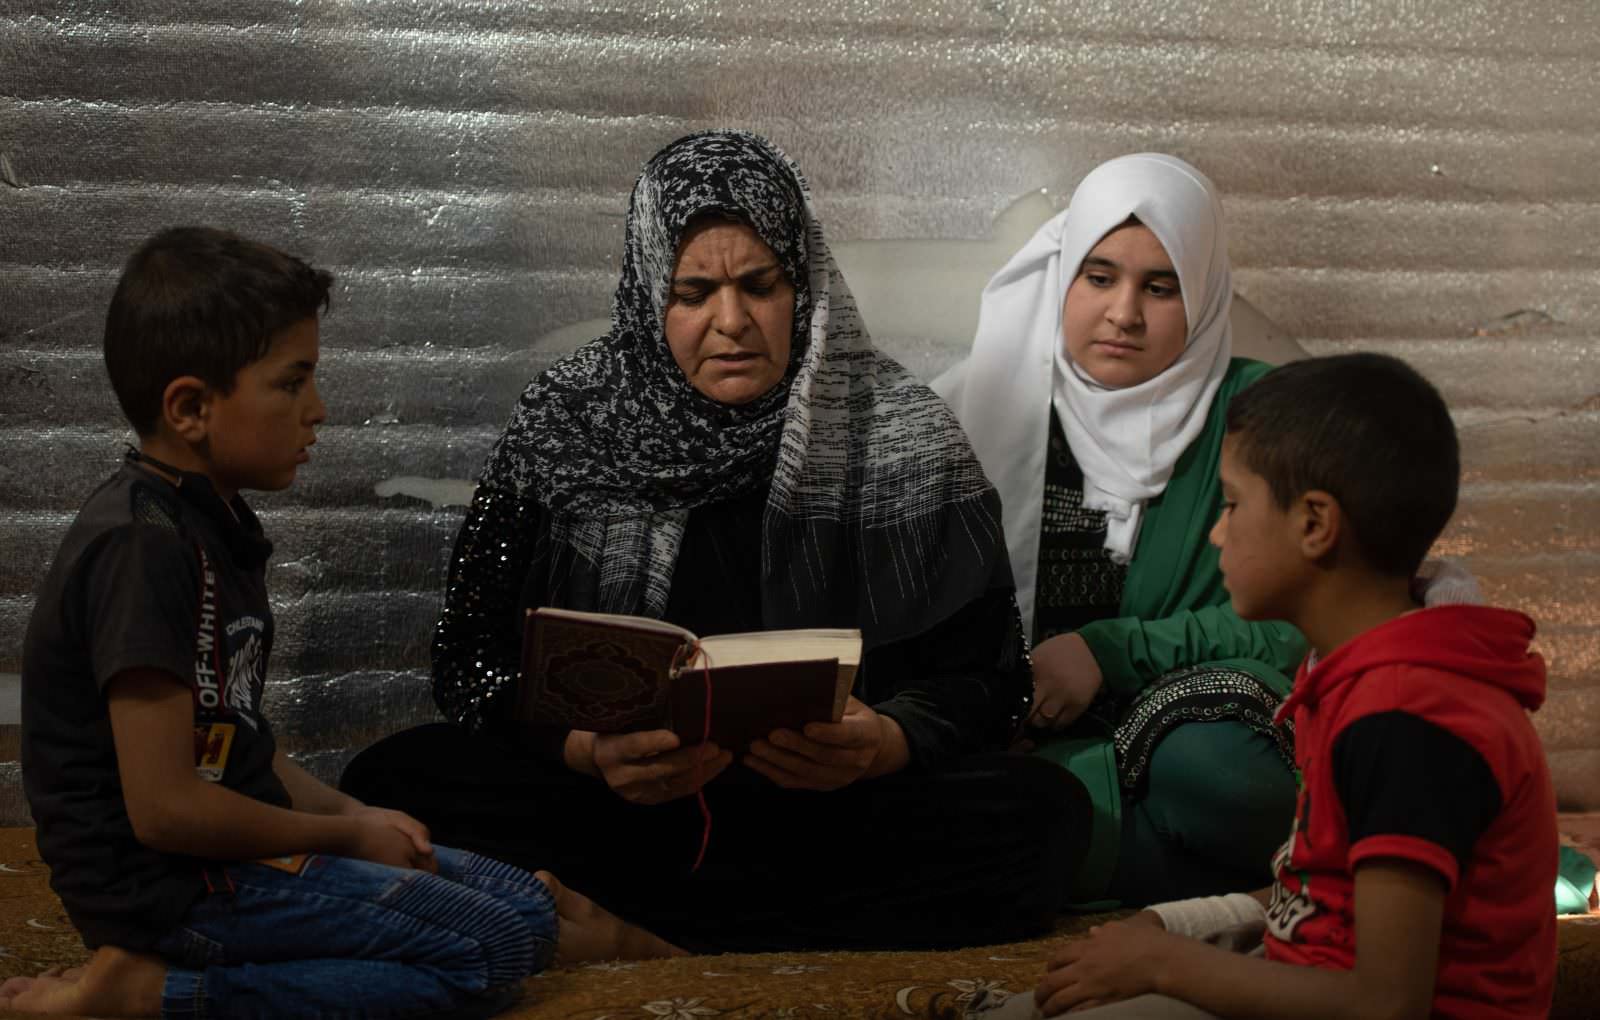 Um Hadi reads the Qur’an with her three children Hadi (8), Osama (7) and Shatha (13) at home in Azraq Camp. 

During Ramadan the family spend more time praying and reading the Qur’an. Shatha says “This month of Ramadan we should treat each other in nice way and be kind too since it’s a month of forgiveness and compassion.” ; Um Hadi (47) fled her home in Homs, Syria in 2016 after her husband based away. Now living in Azraq Camp, the is the primary guardian for her three children Hadi (8), Osama (7) and Shatha (13).
 
This Ramadan is their sixth in Jordan and Um Hadi says that it its at this time of year when she misses her family back in Syria the most “I call my mom every day to check on her.”